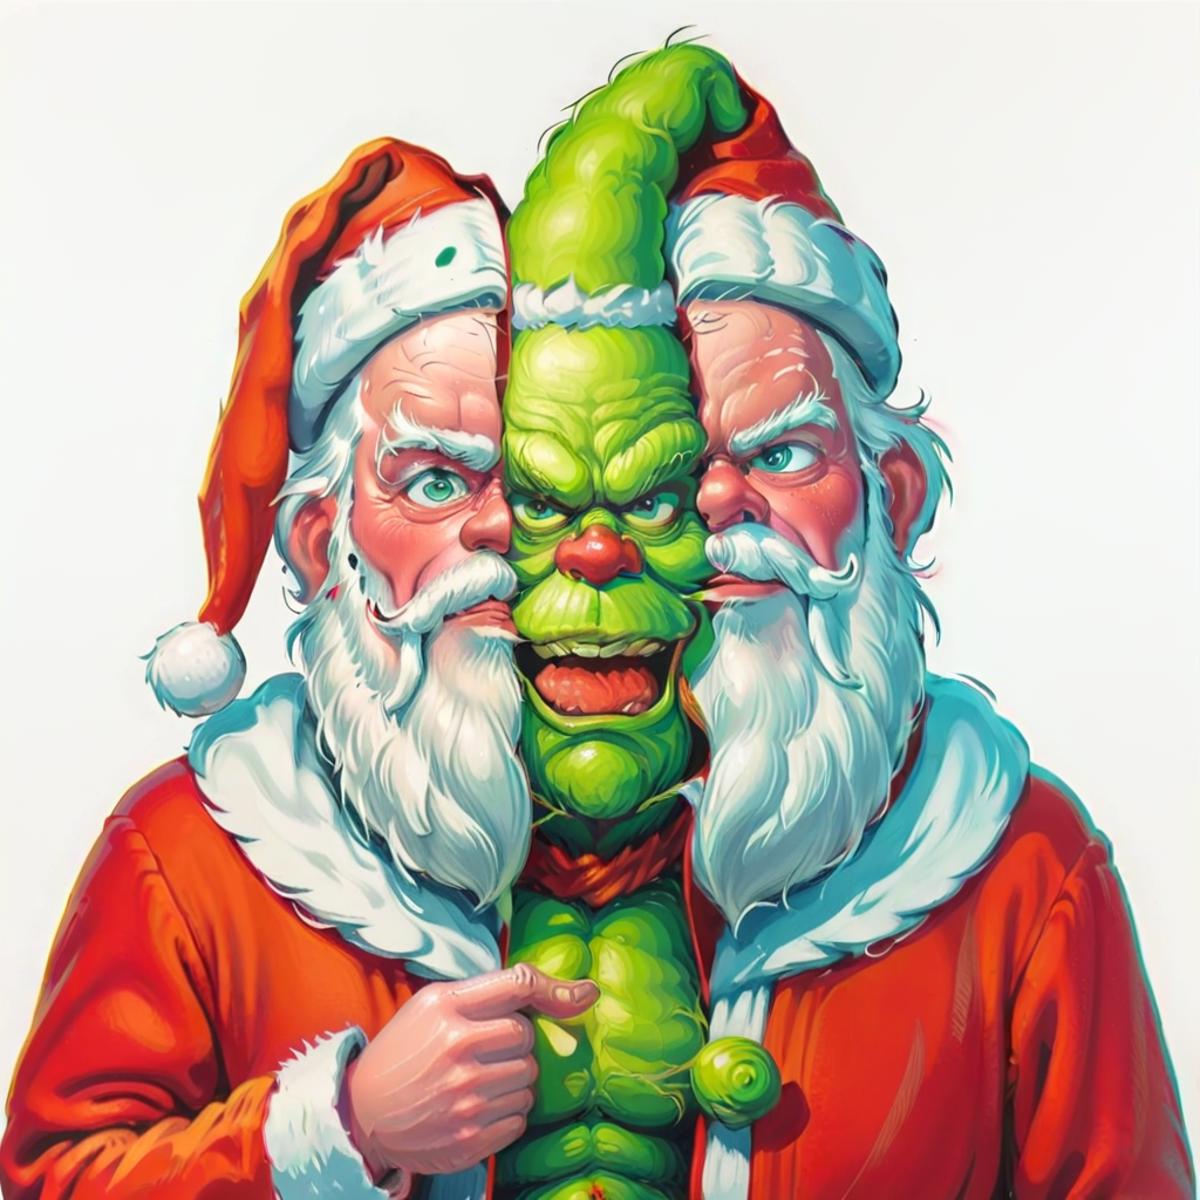 A Christmas-themed illustration of Santa Claus and the Grinch with green makeup, wearing Santa hats and a Santa suit.